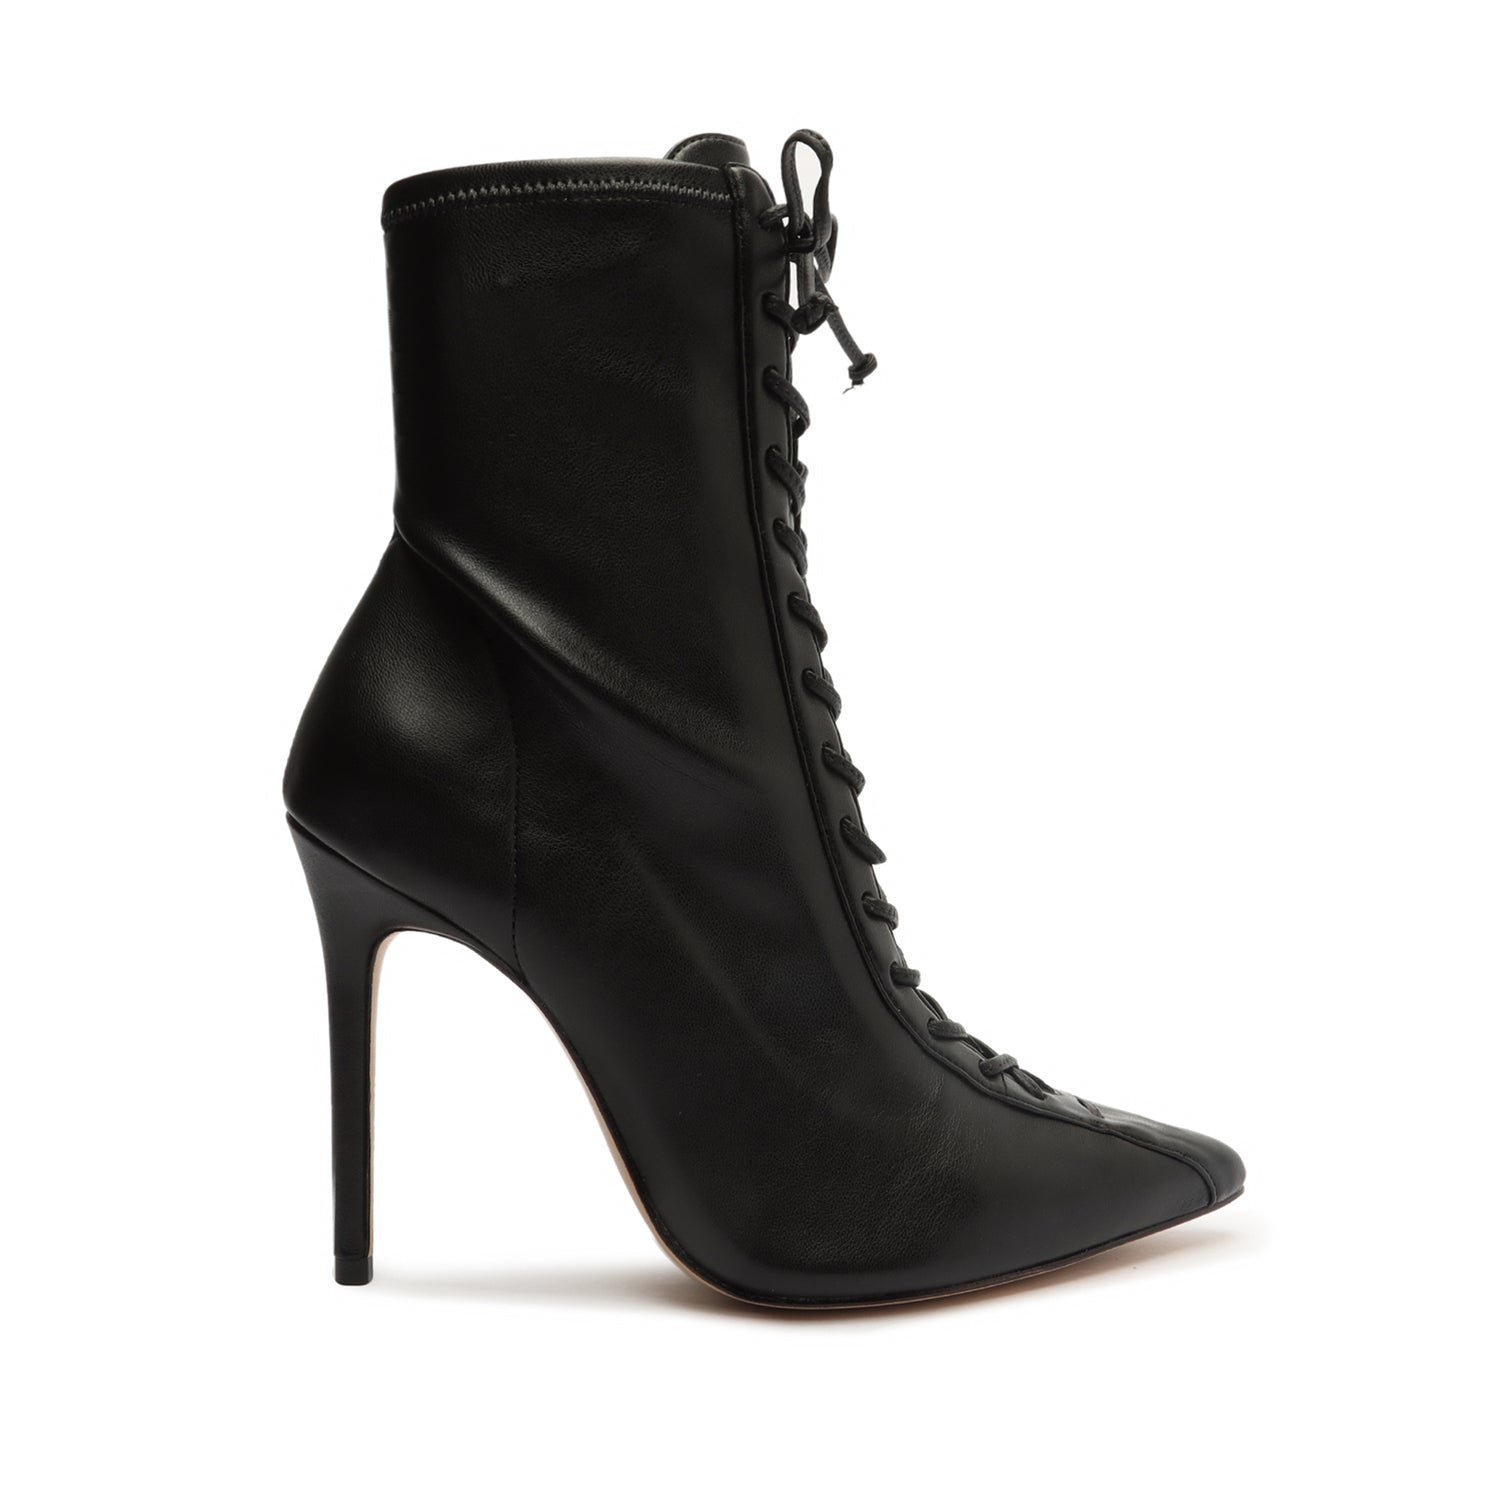 Leather Kitten Heel Pointed Ankle Boots